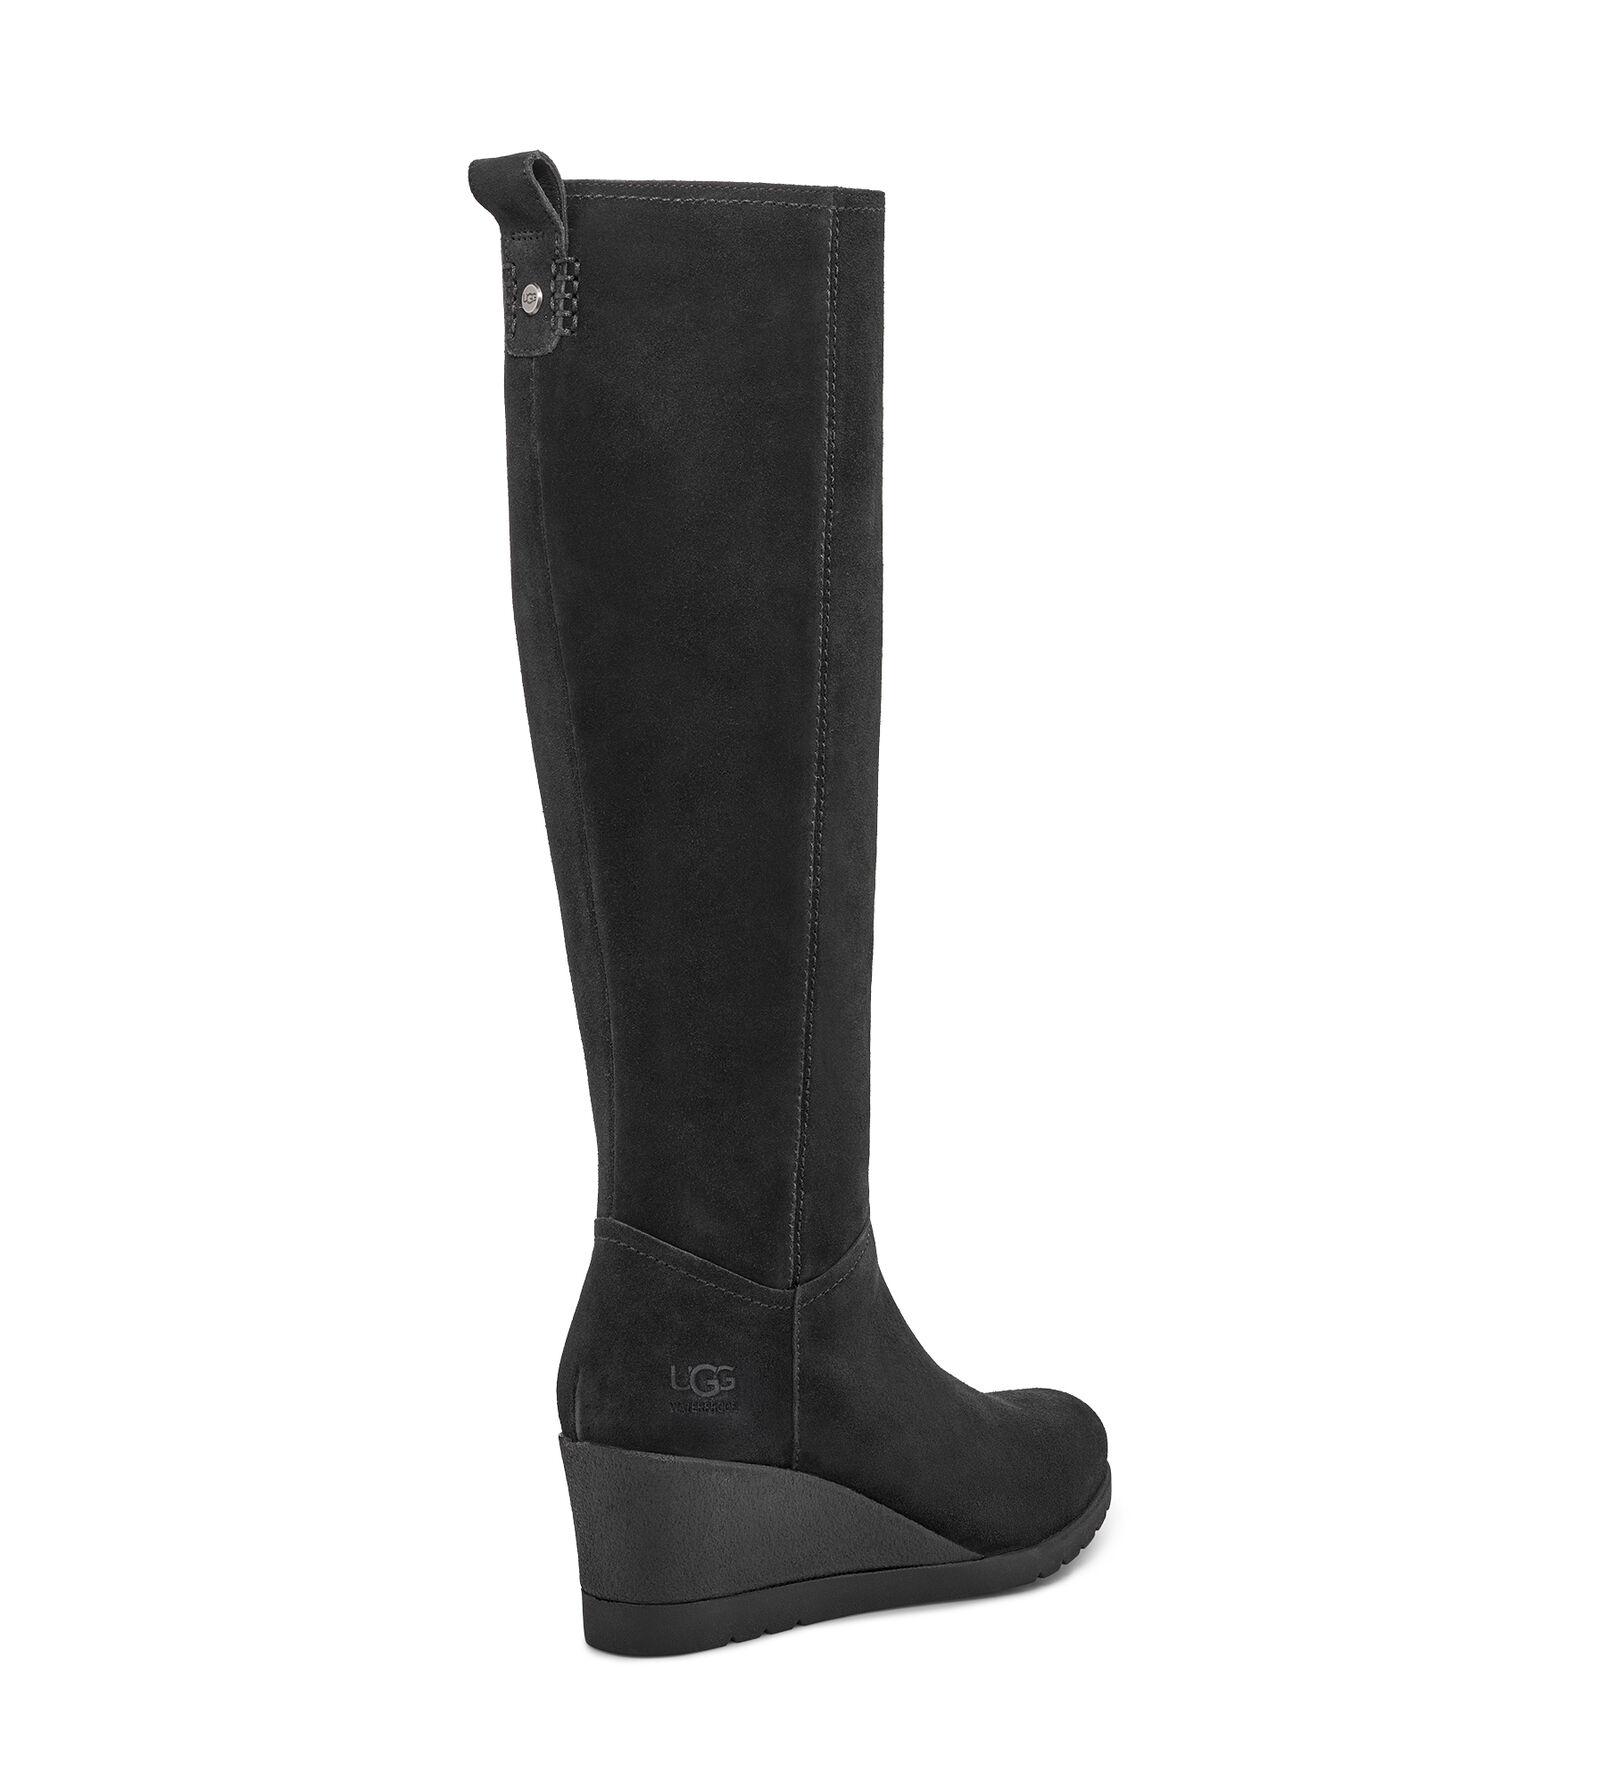 UGG Rubber Oliveira Tall Boot in Black - Lyst